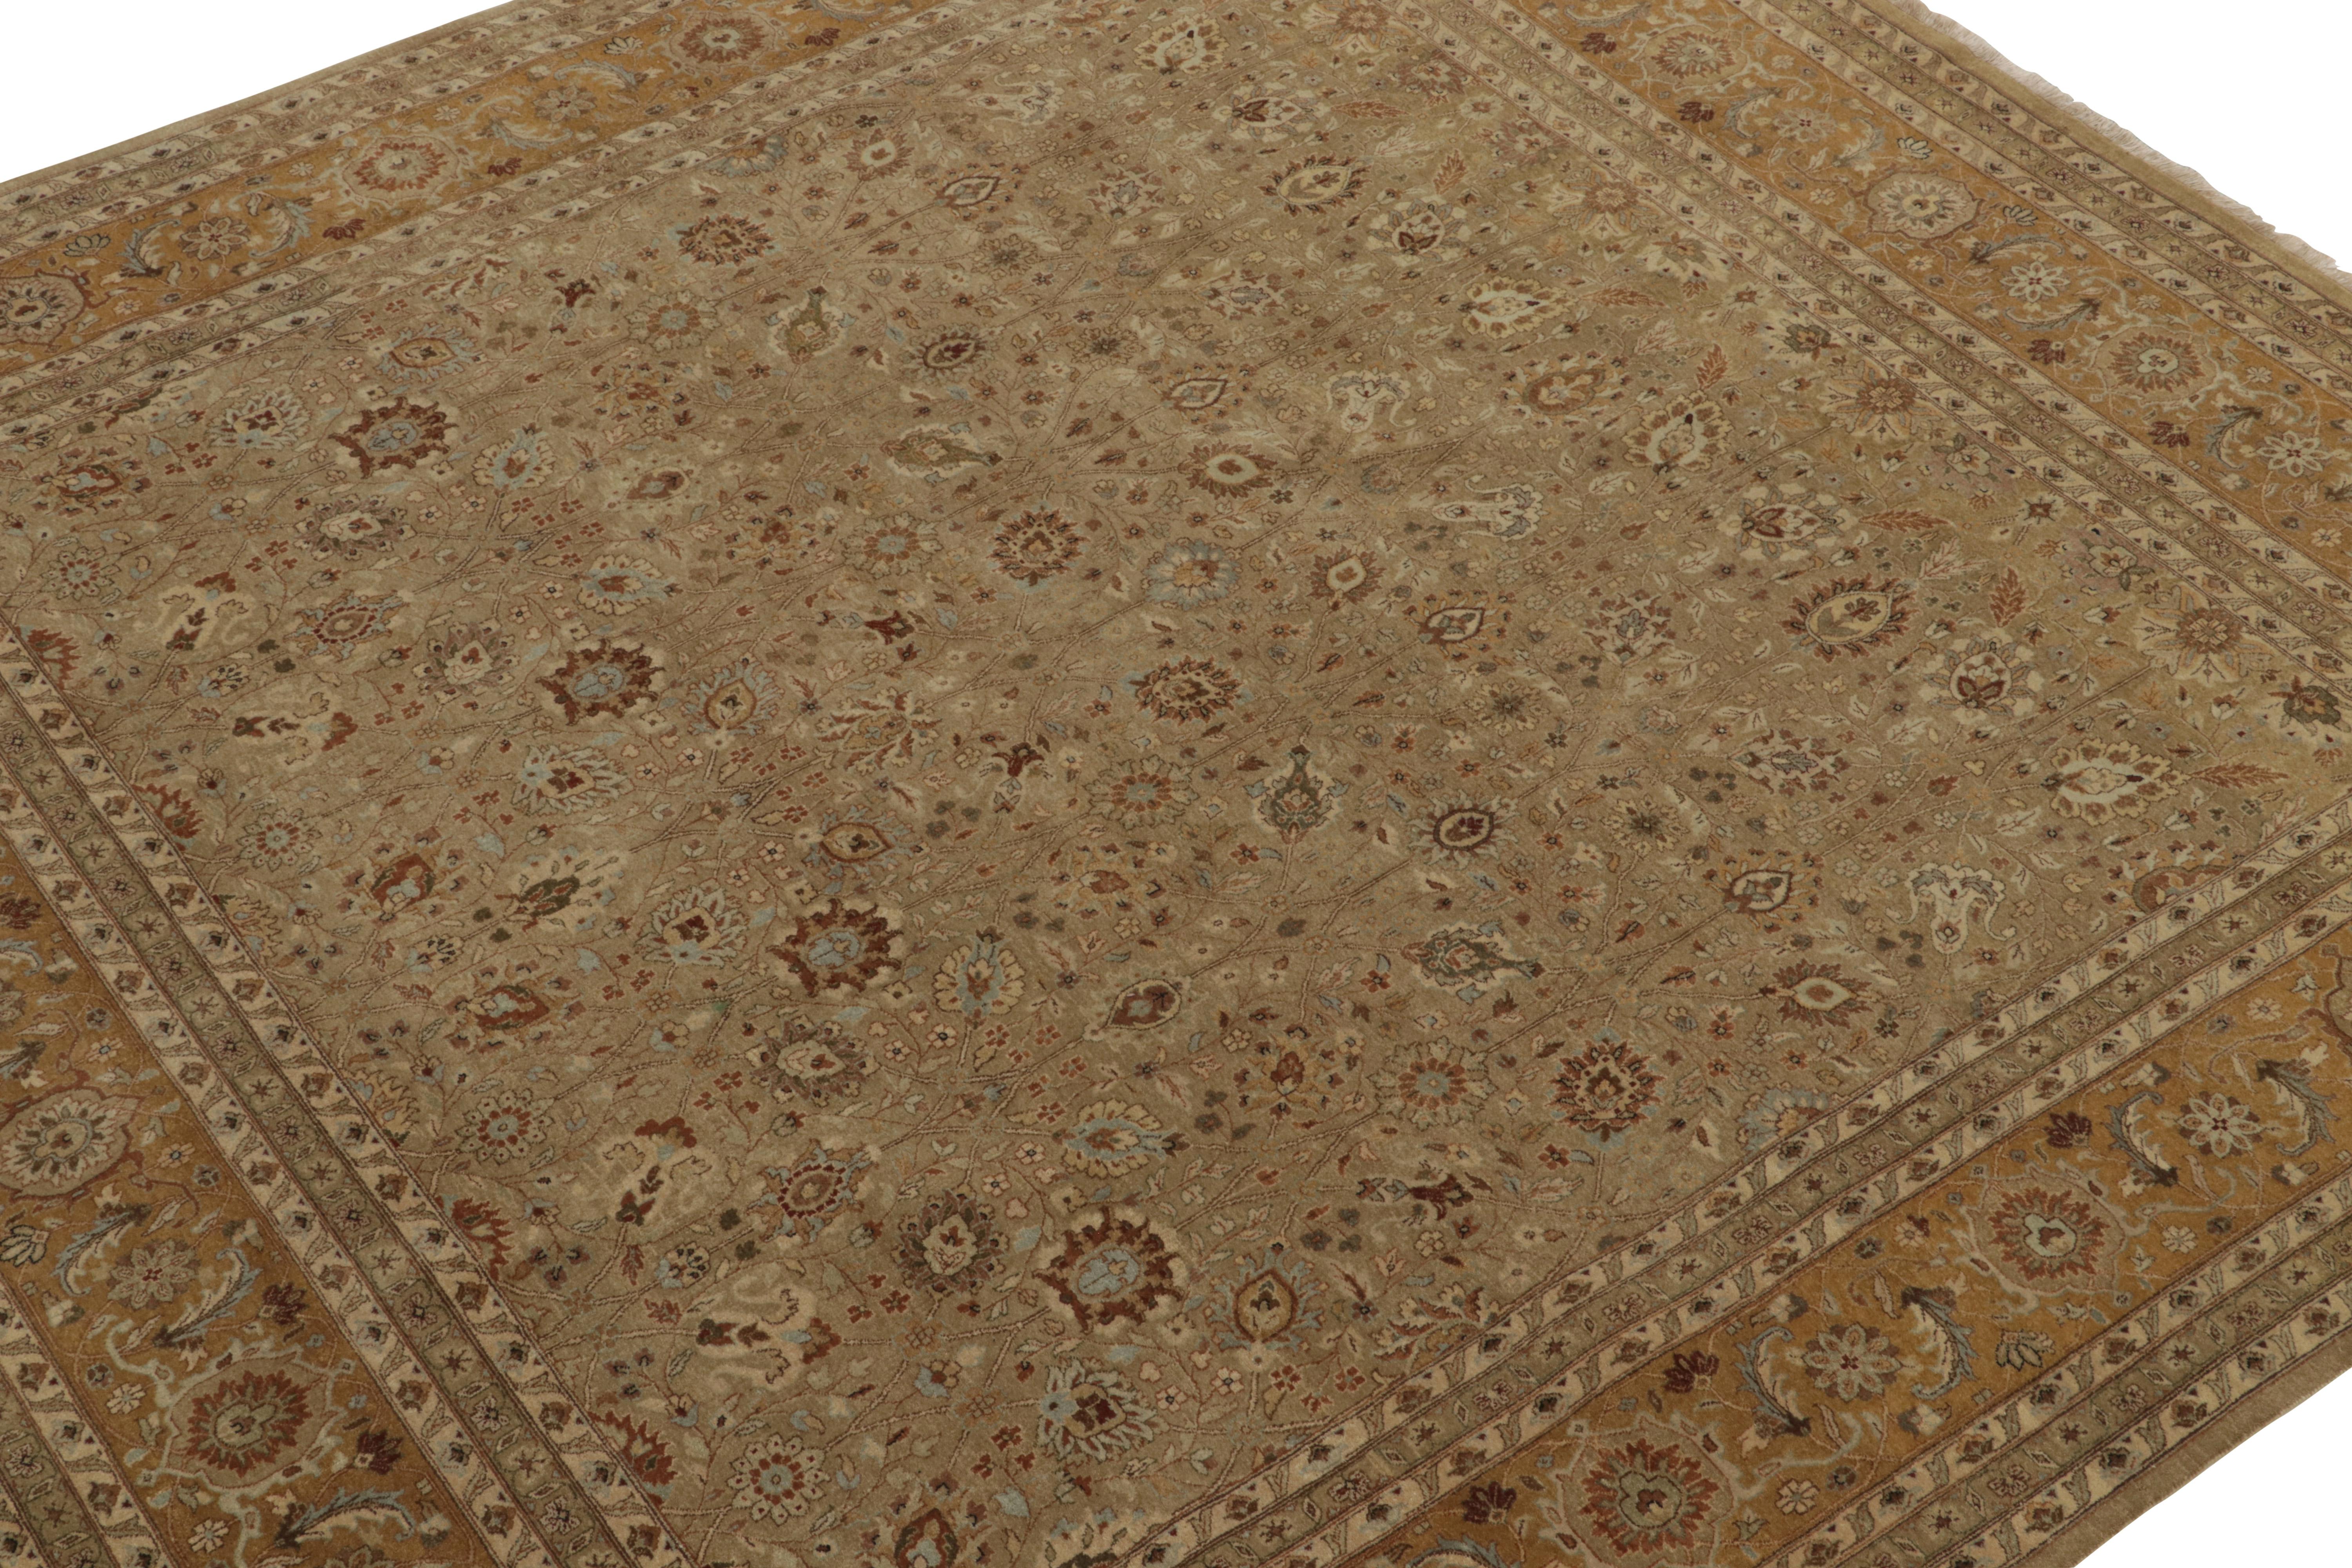 Hand-Knotted Rug & Kilim’s Antique Persian style Square rug in Beige-Brown Floral Patterns For Sale